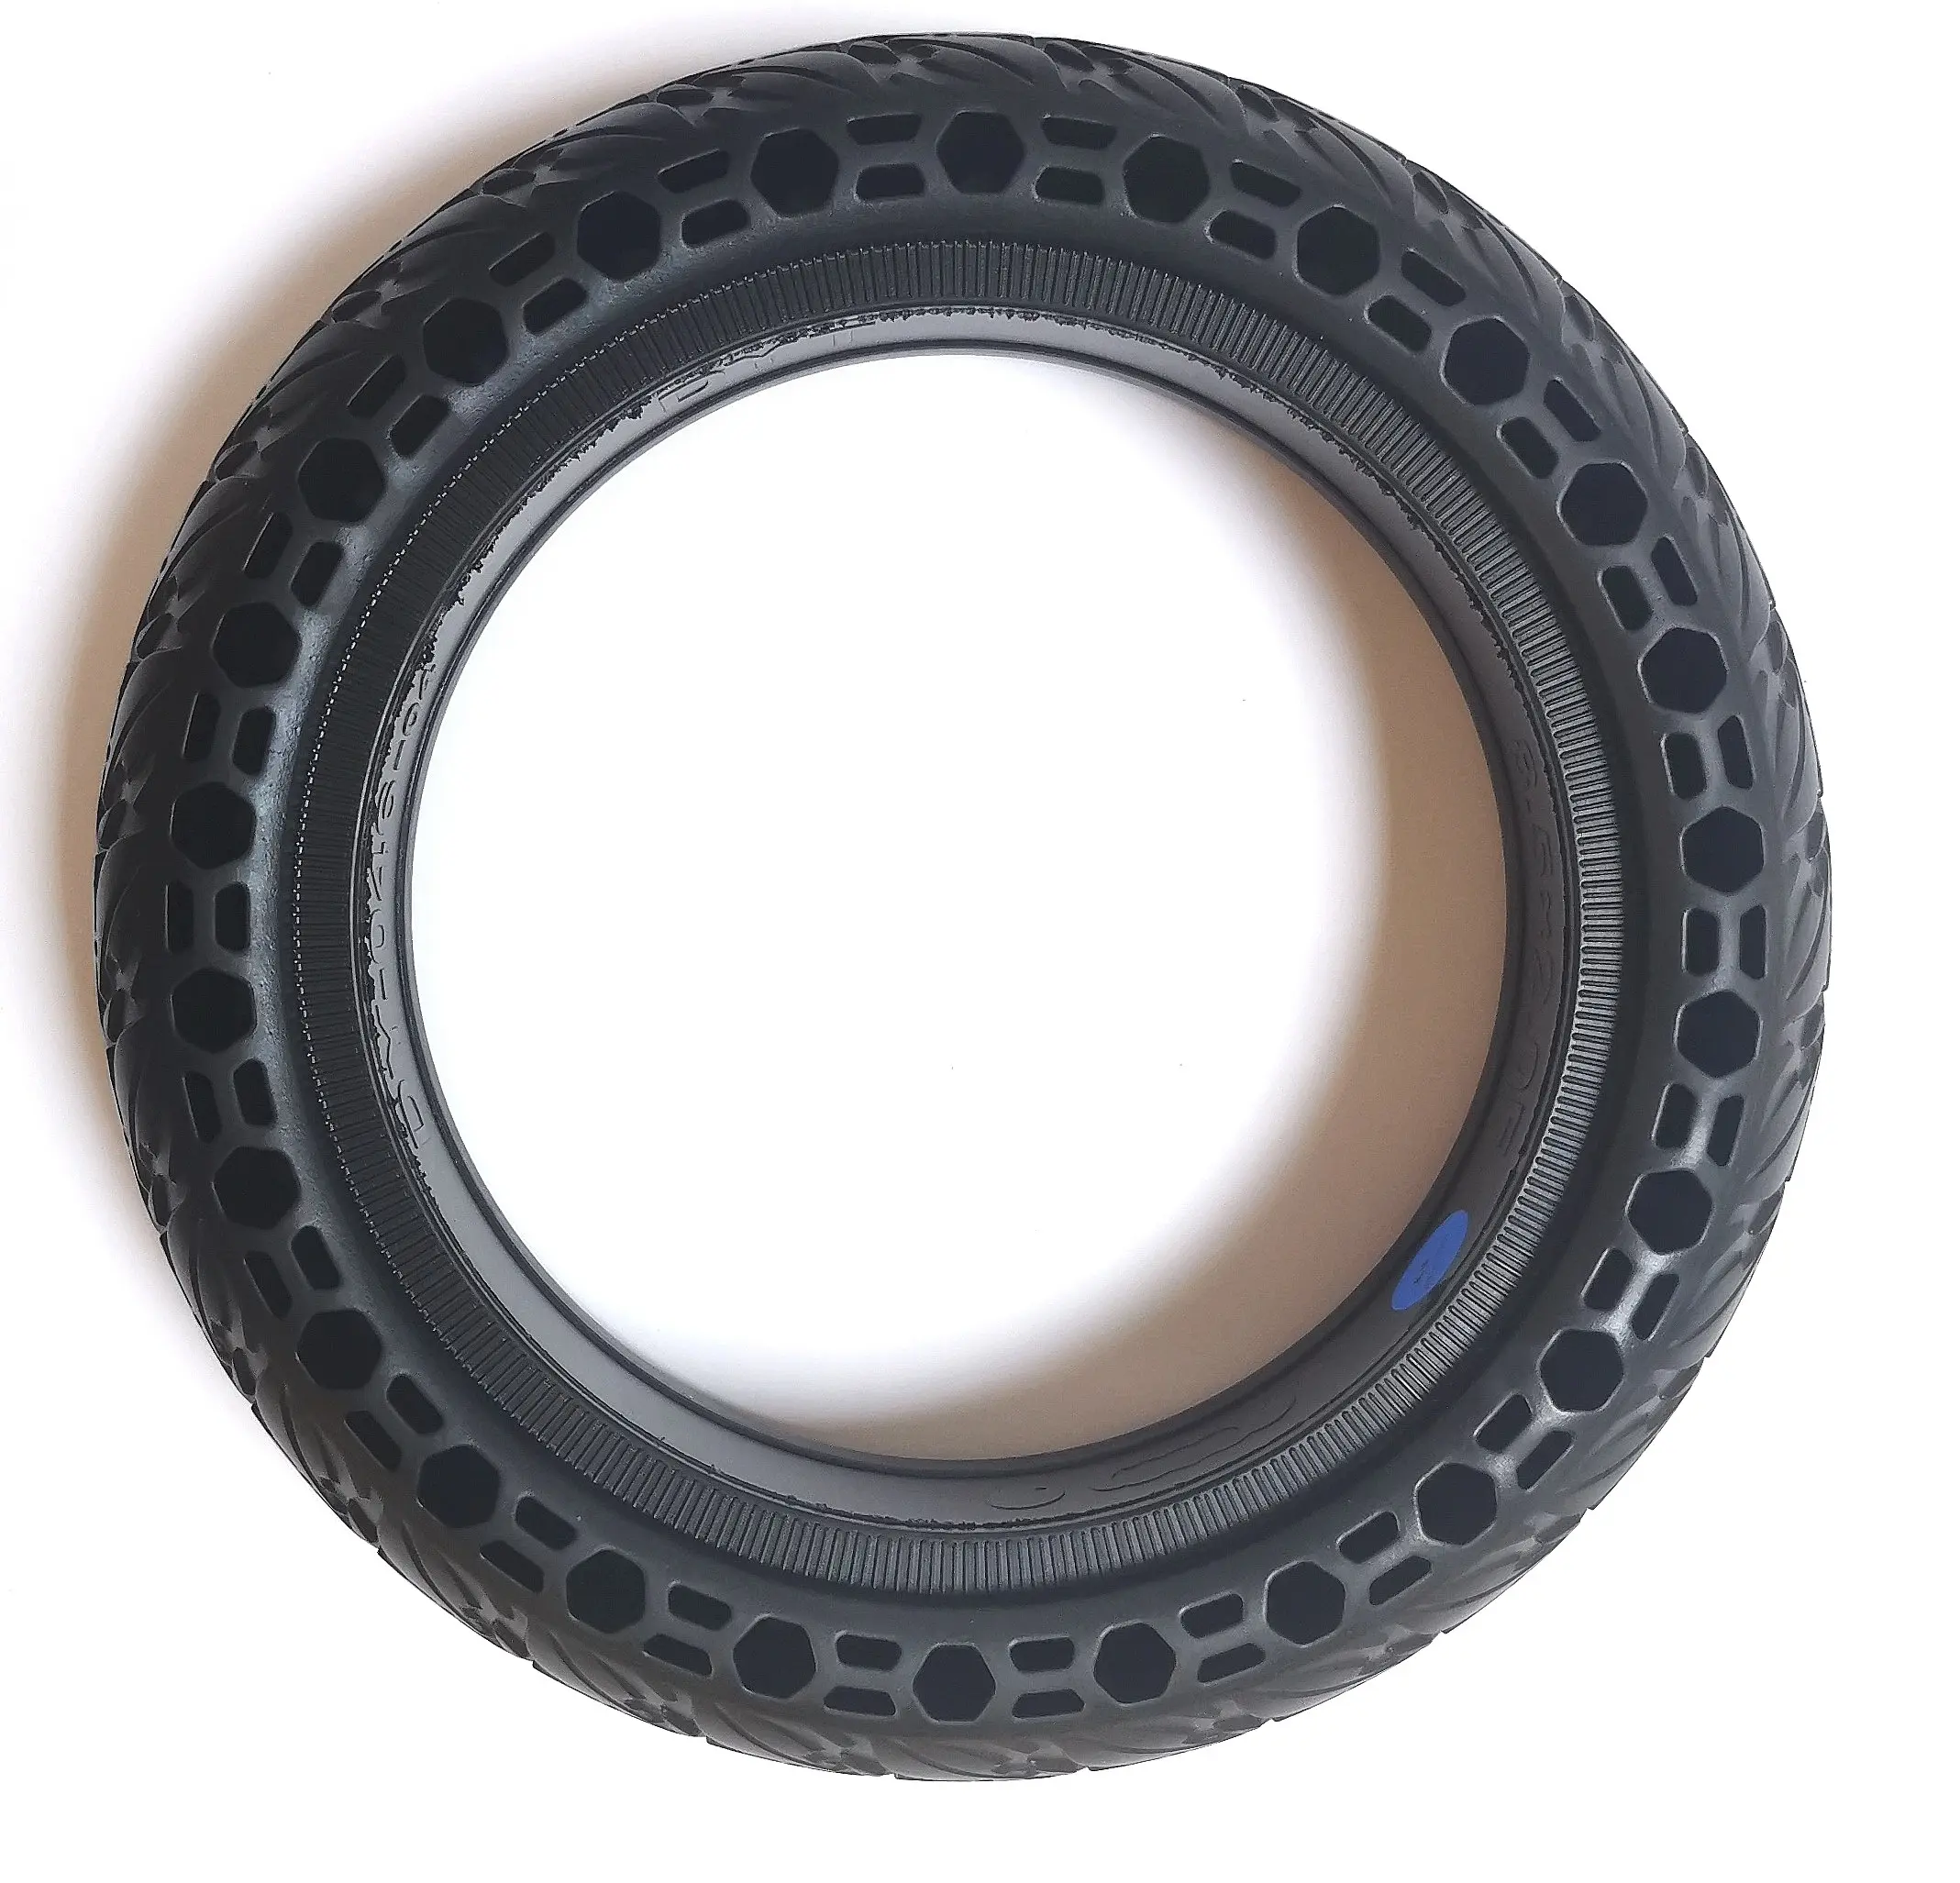 Xiaomi M365 tire Replacement